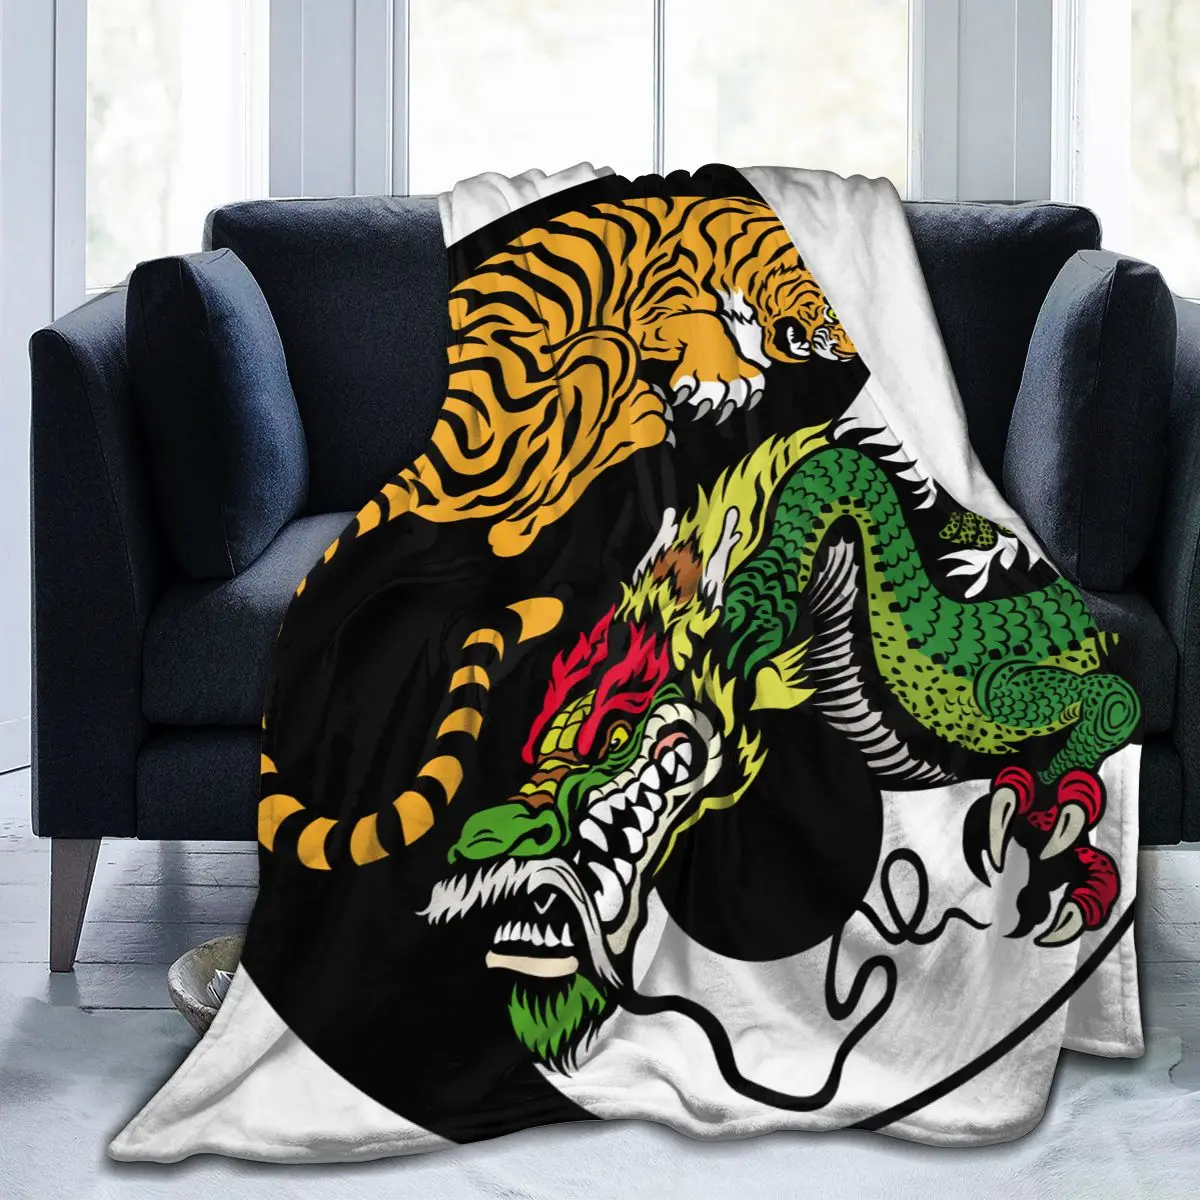 

Dragon Tiger Fight Galaxy Soft Warm Throw Blanket Lightweight Flannel Bed Blanket Gift for Boy Teen Adults or Pet Couch Blankets